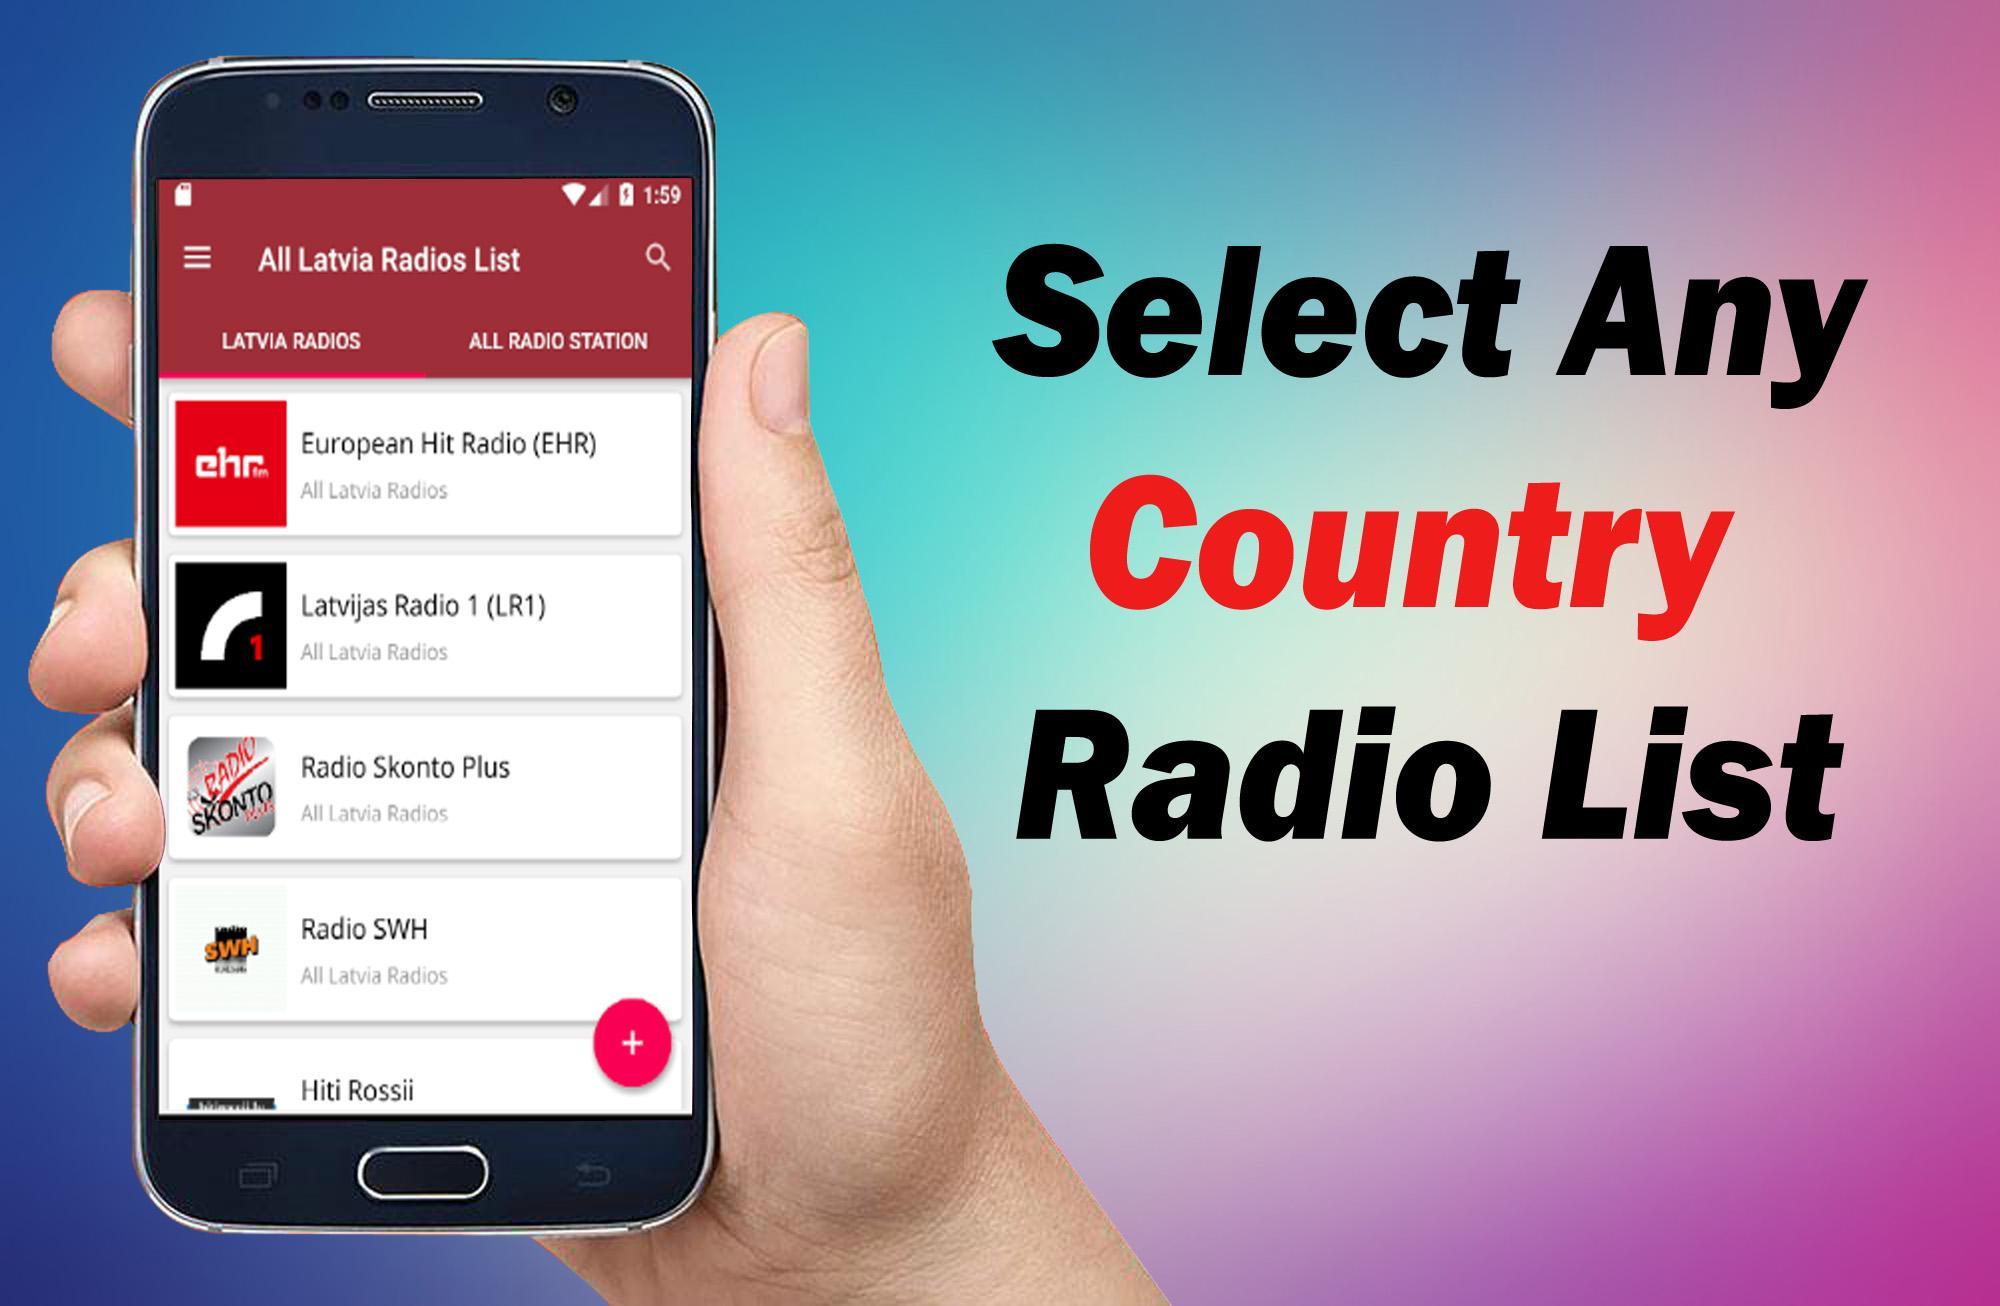 All Latvia Radios - Radio Latvia - Radio FM Latvia for Android - APK  Download